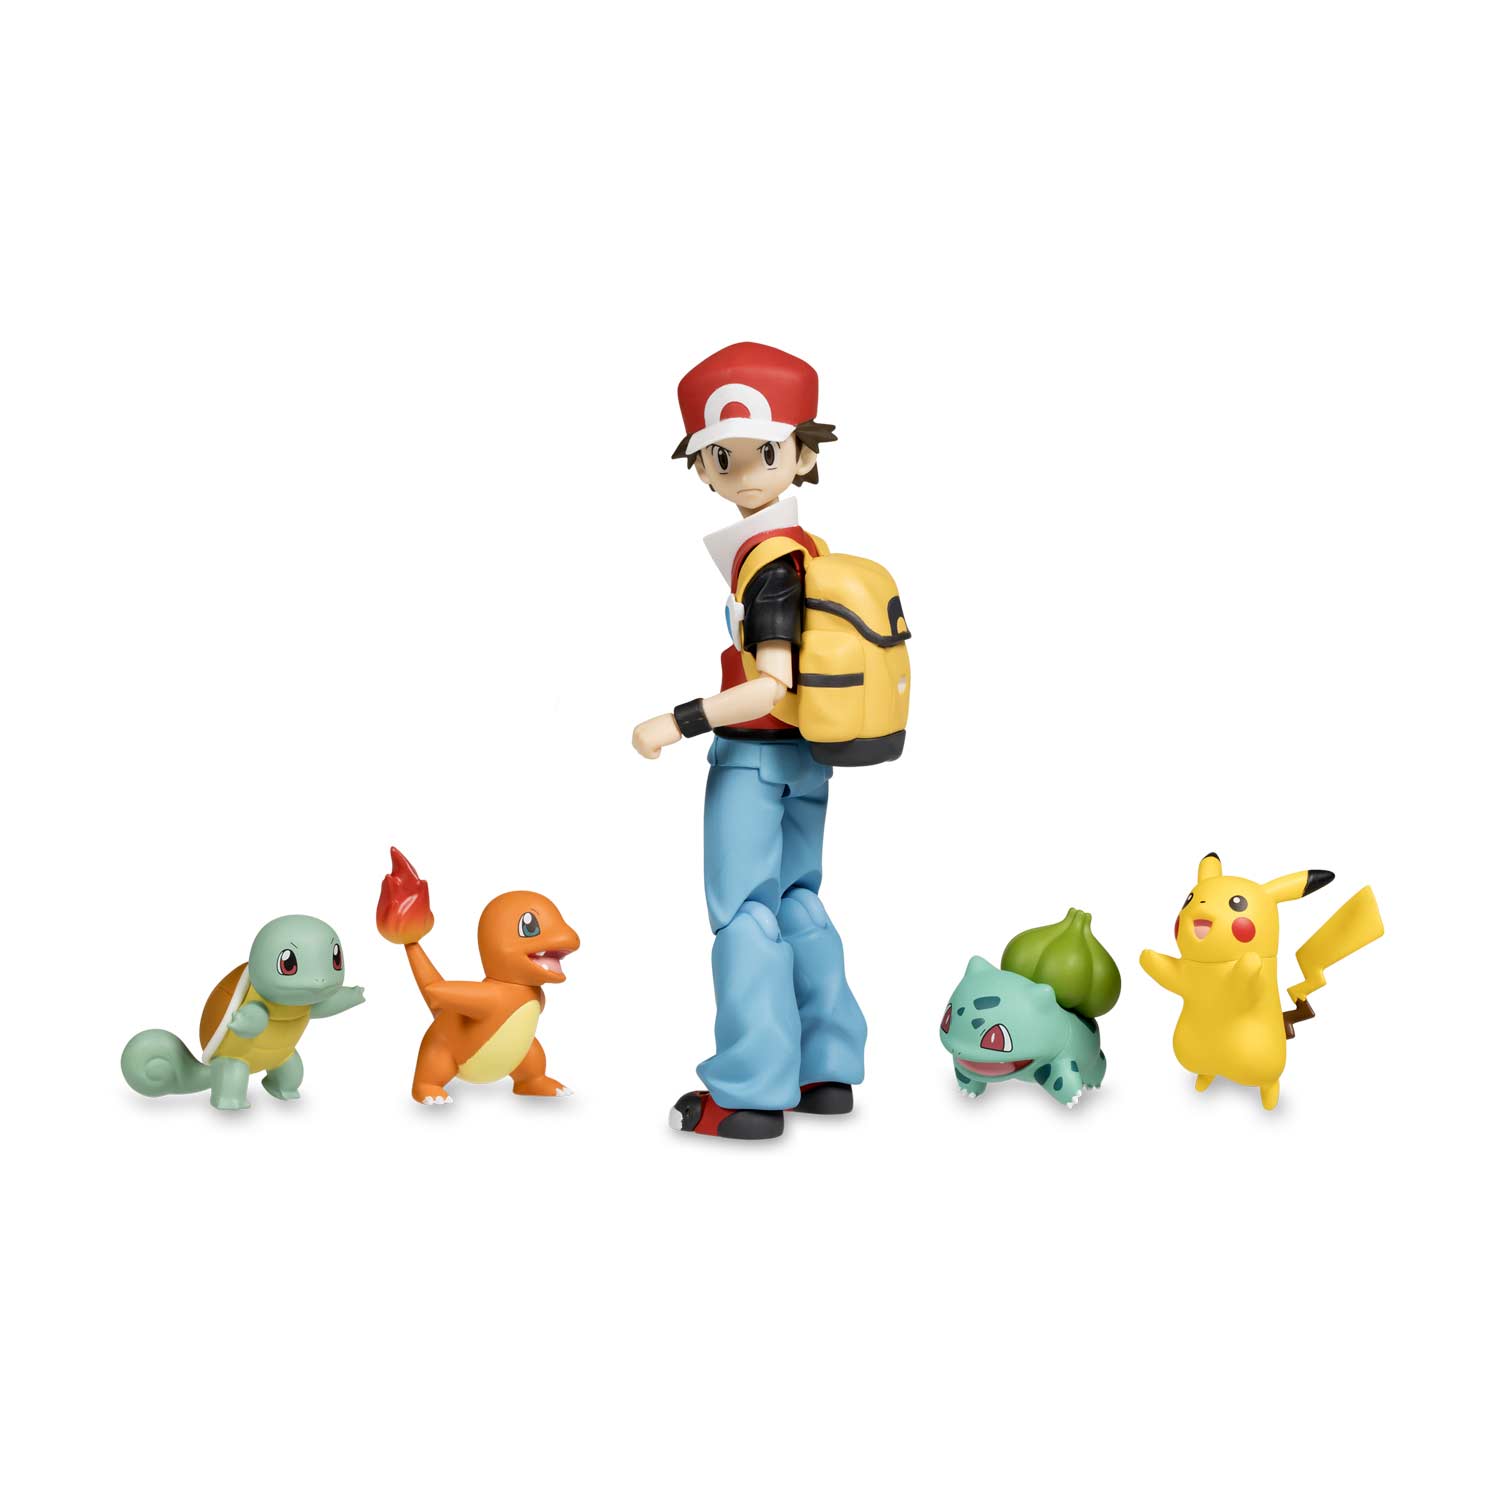 Figma Red Posable Figure With Pikachu Bulbasaur Charmander Squirtle